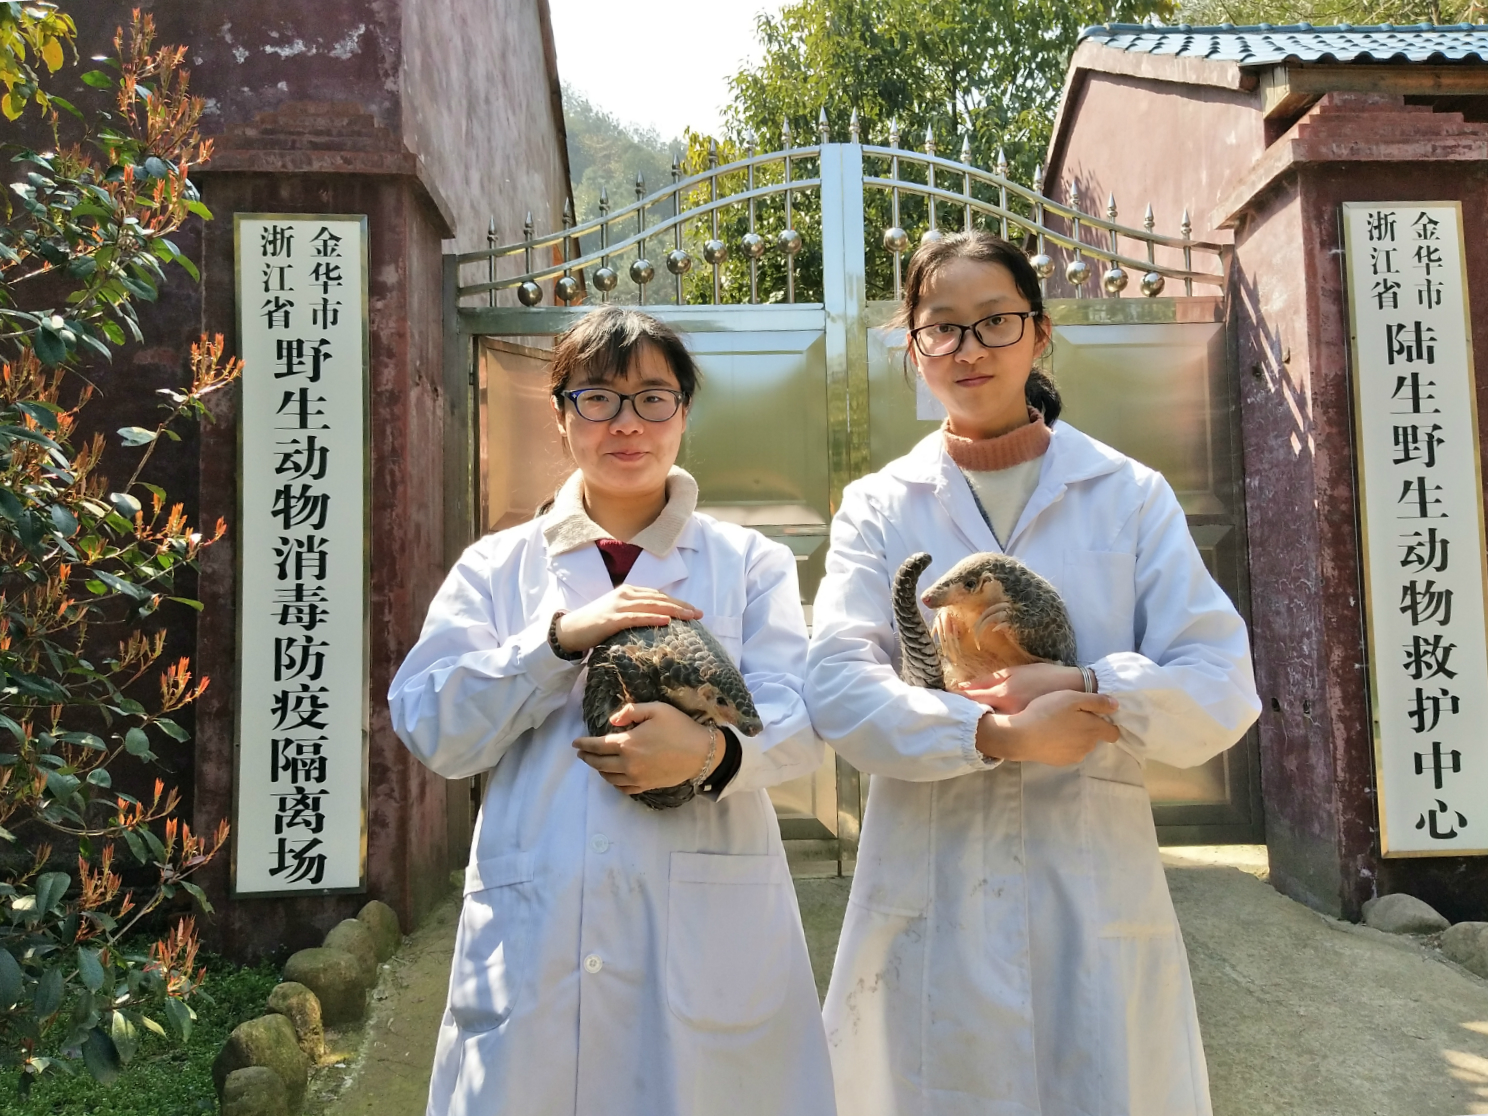 https://chinadialogue-production.s3.amazonaws.com/uploads/content/image/11275/Staff_at_Wildlife_Rescue_Centre_along_with_two_rescued_Chinese_pangolins.jpg